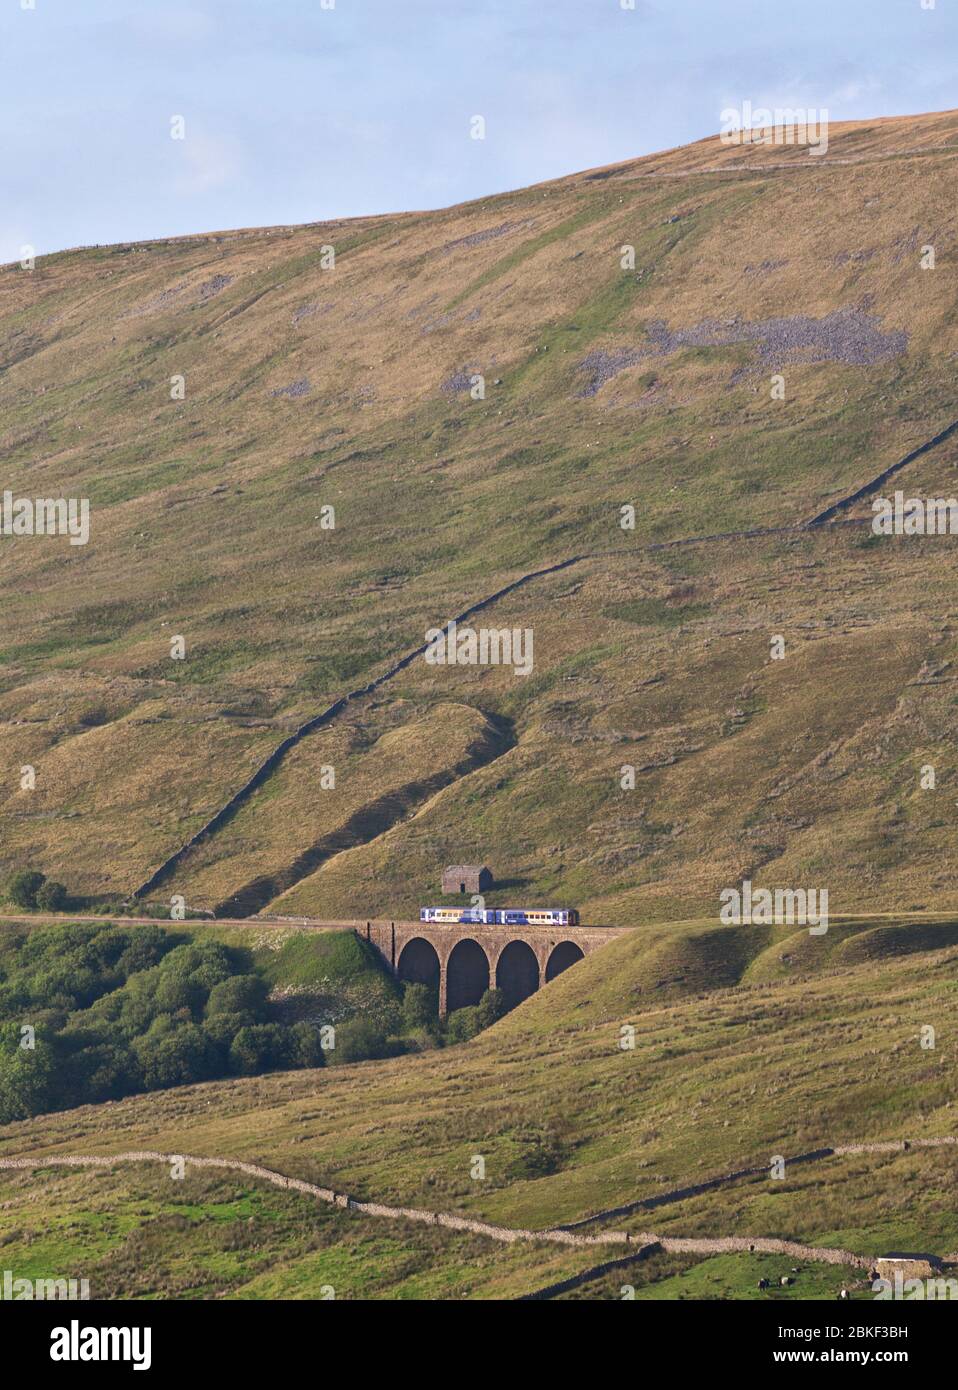 Northern Rail class 158 express sprinter train crossing Arten Gill viaduct in the landscape on the Settle to Carlisle railway line Stock Photo